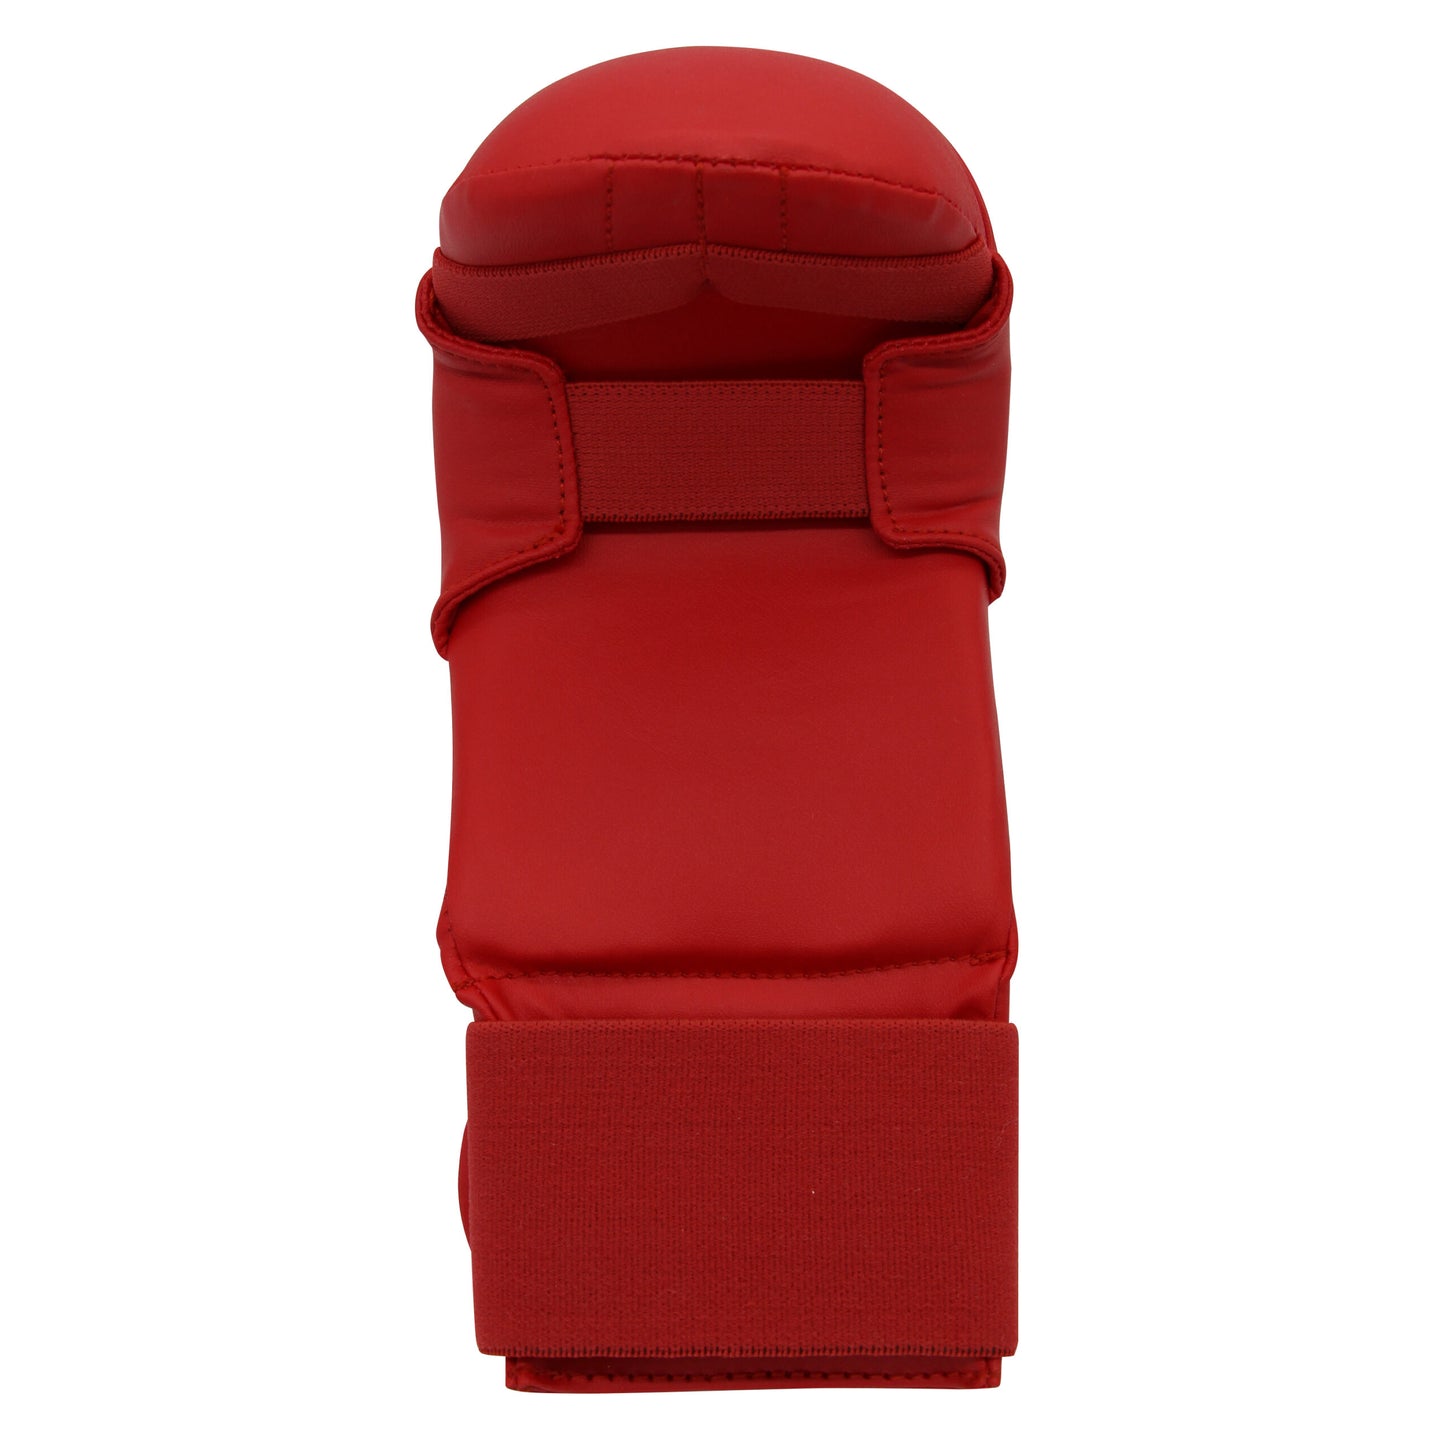 Adidas Wkf Approved Karate Mitts Red 04